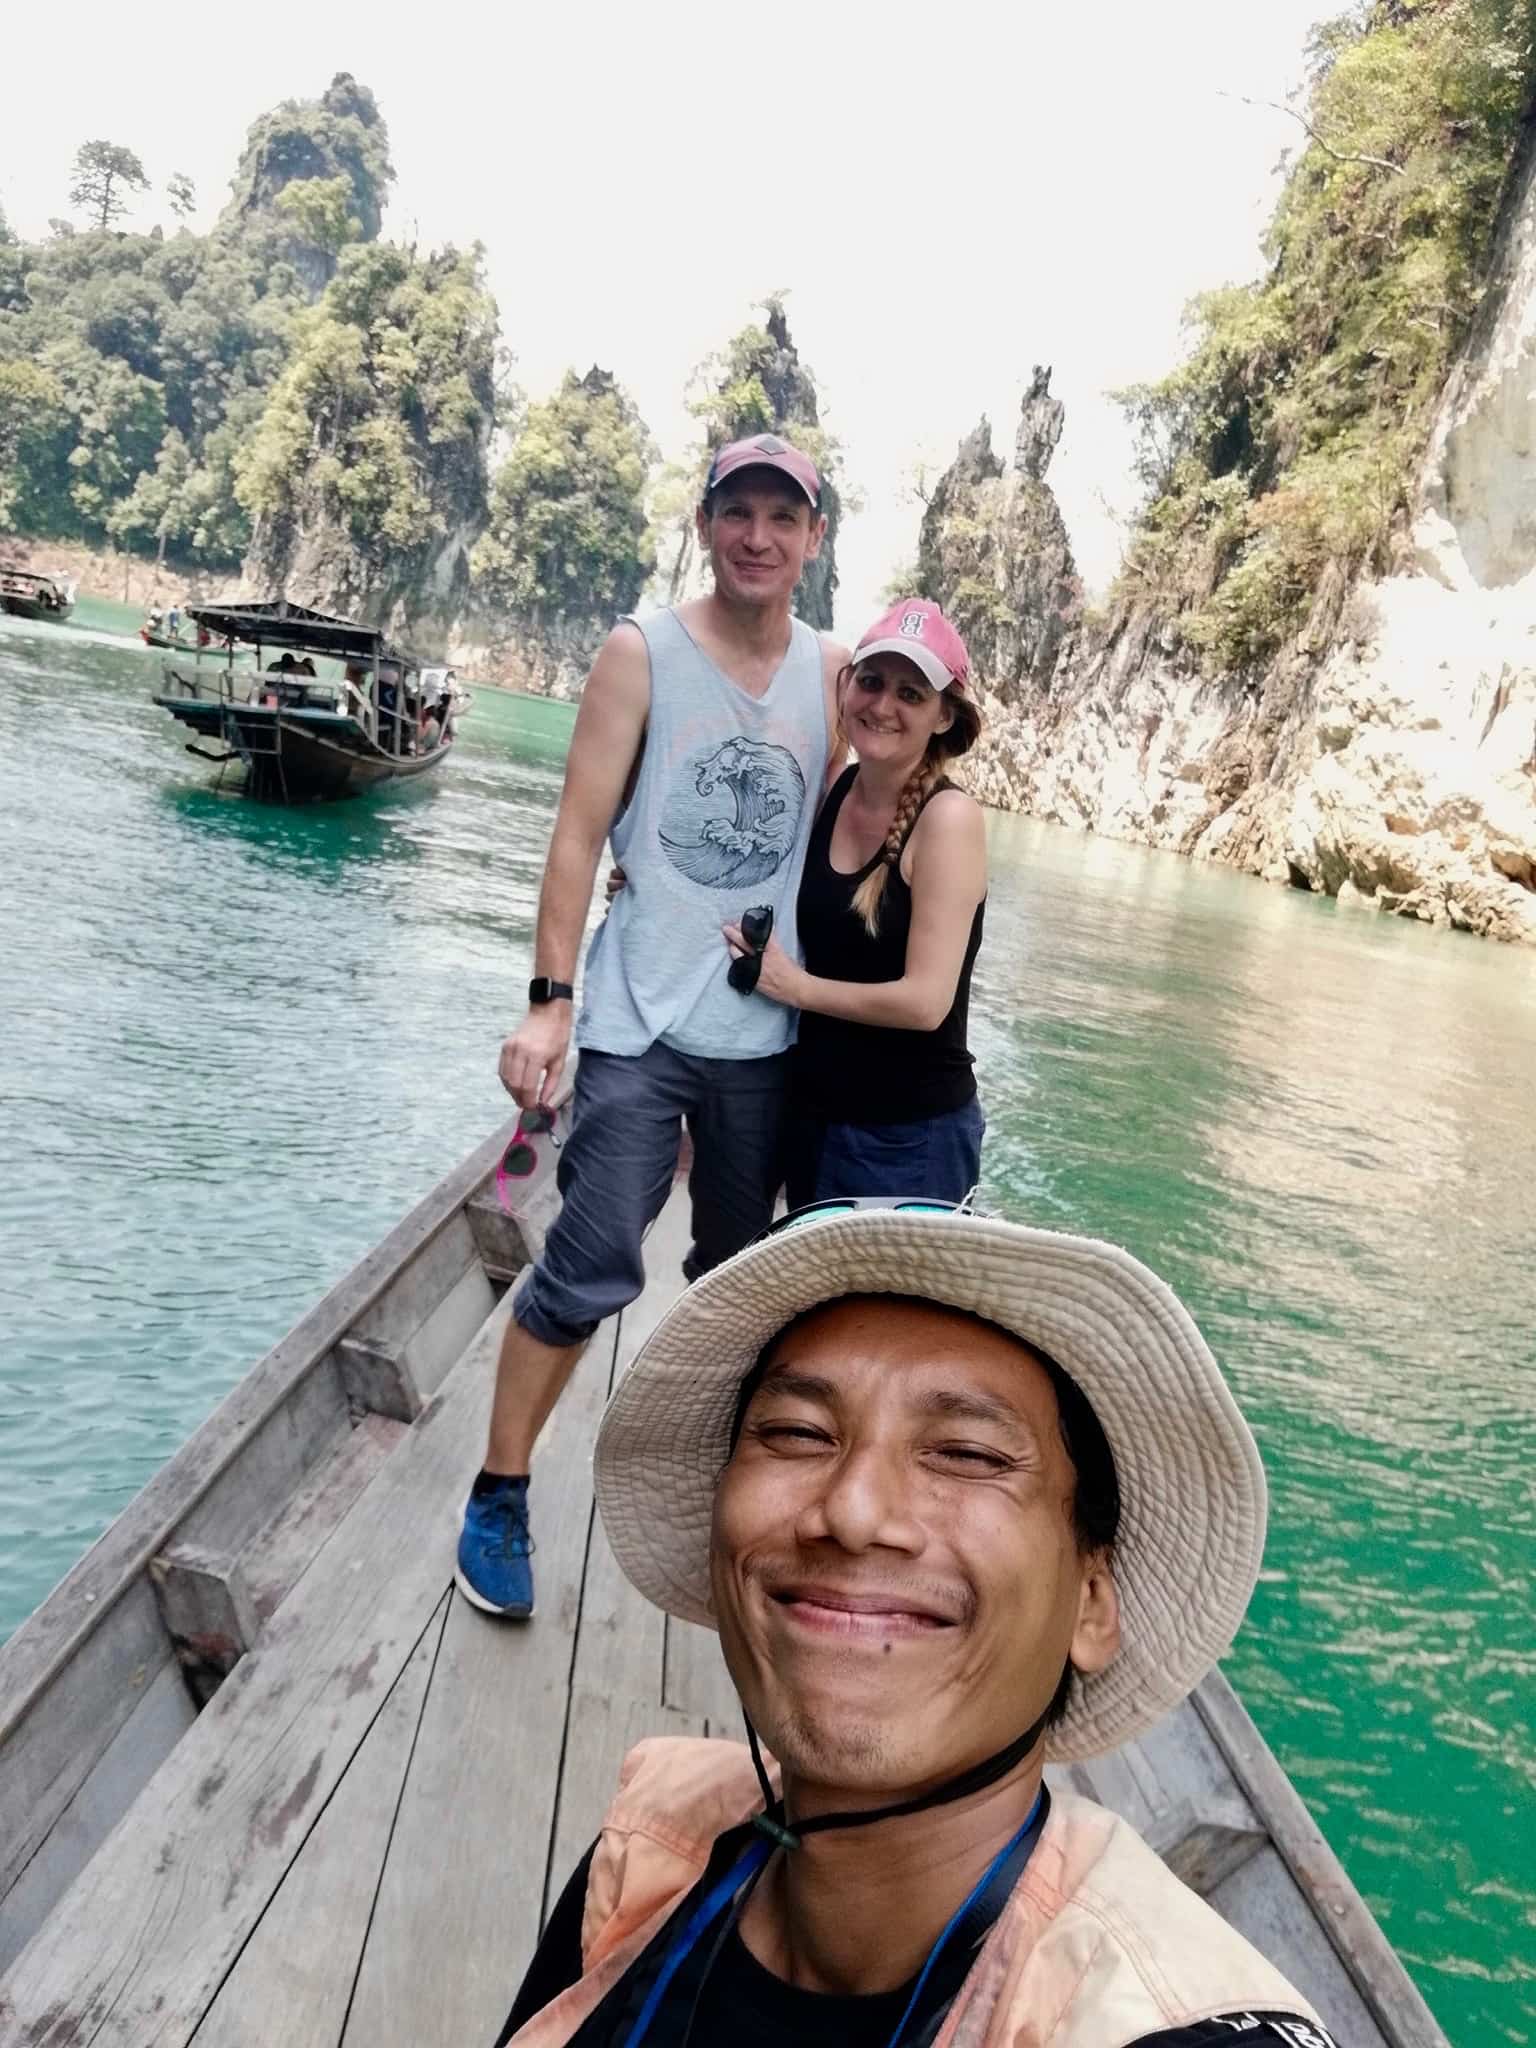 Us on a boat trip in Khao Sok National Park, Thailand